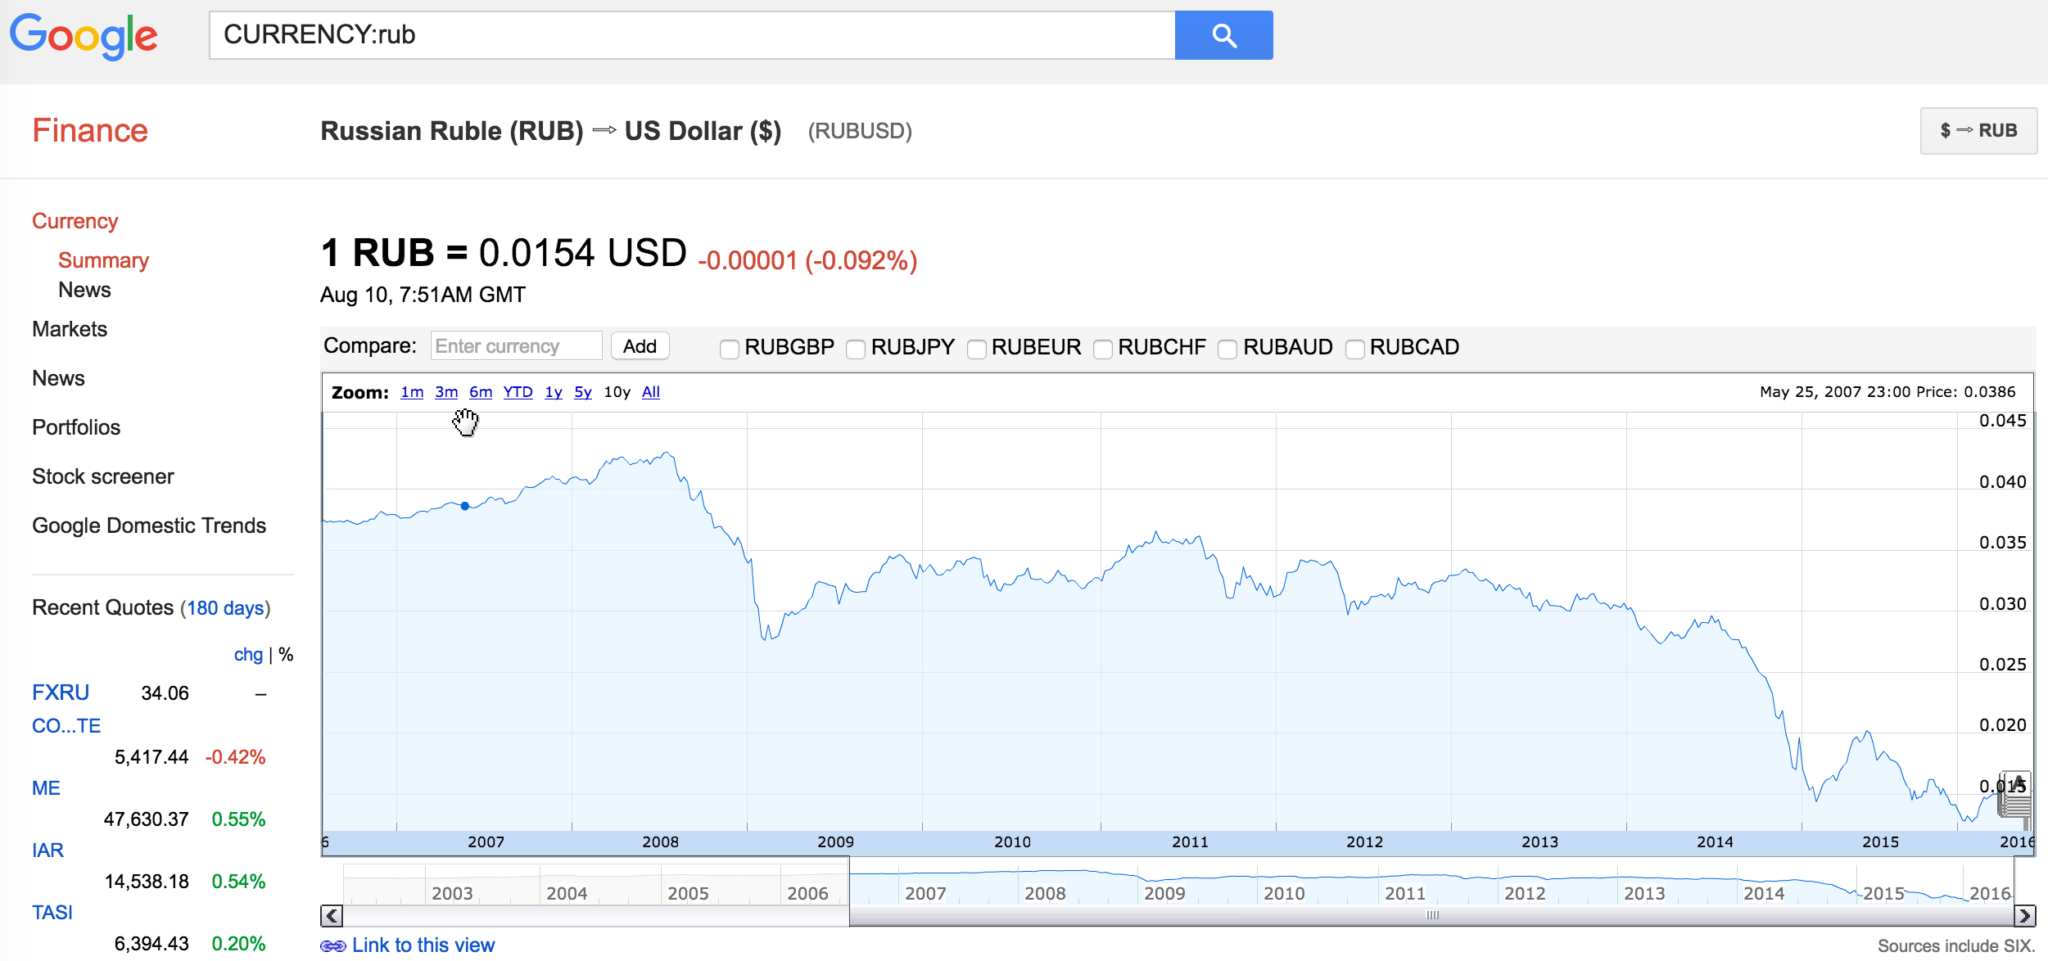 image of google finance currency chart